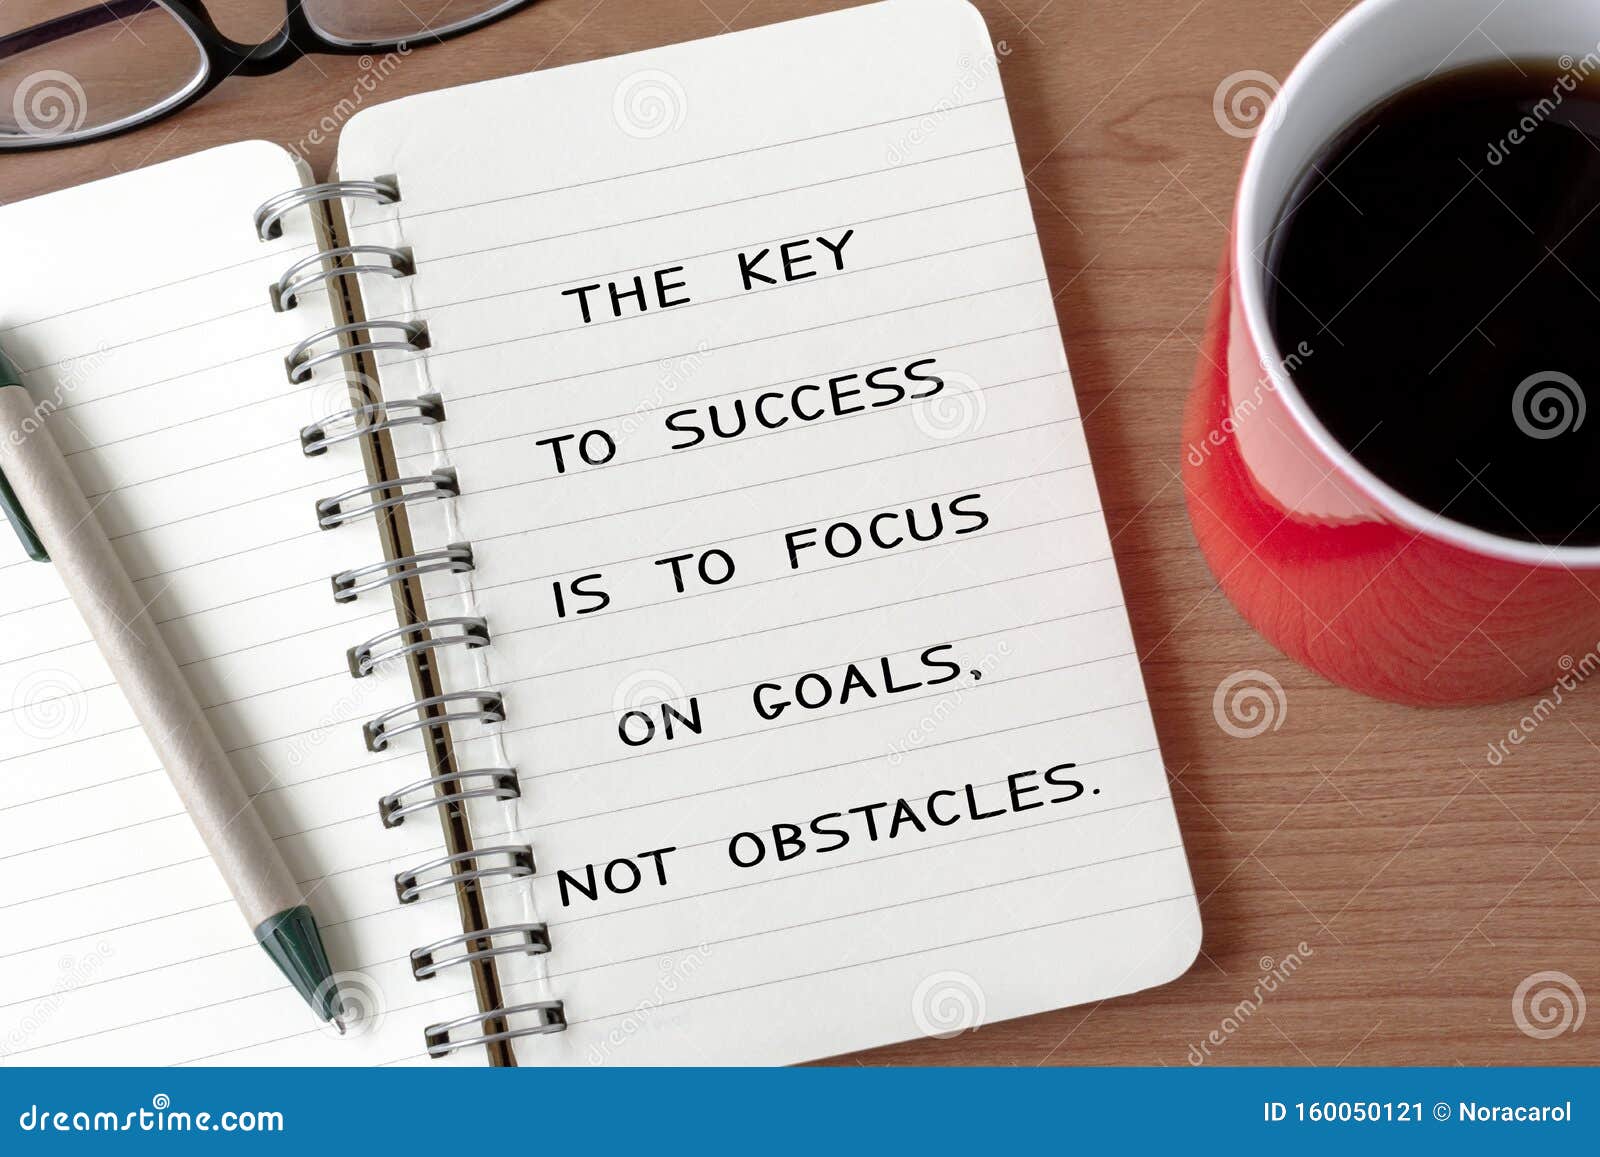 life inspirational quote - the key to success is to focus on goals. not obstacles